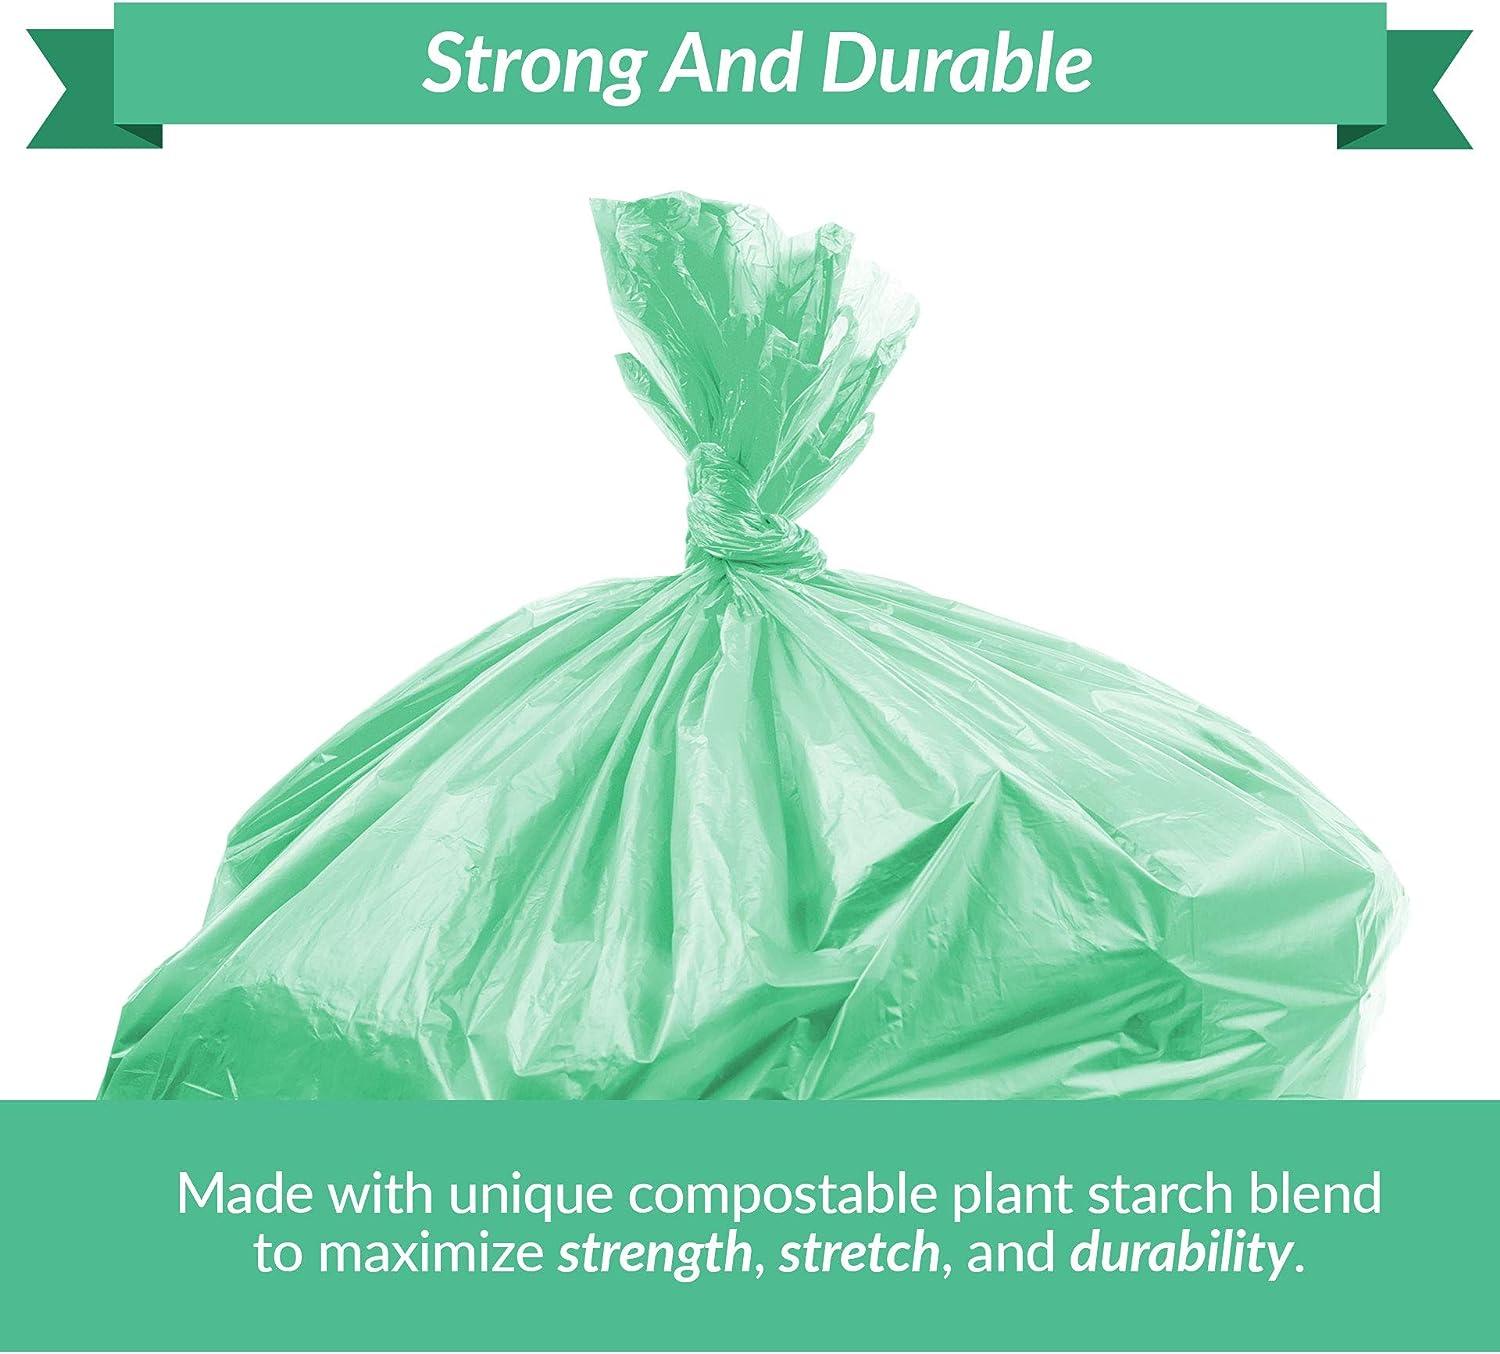 Reli. Compostable 13 Gallon Trash Bags | 150 Count Bulk | ASTM D6400 |  Green | Eco-Friendly | For Compost